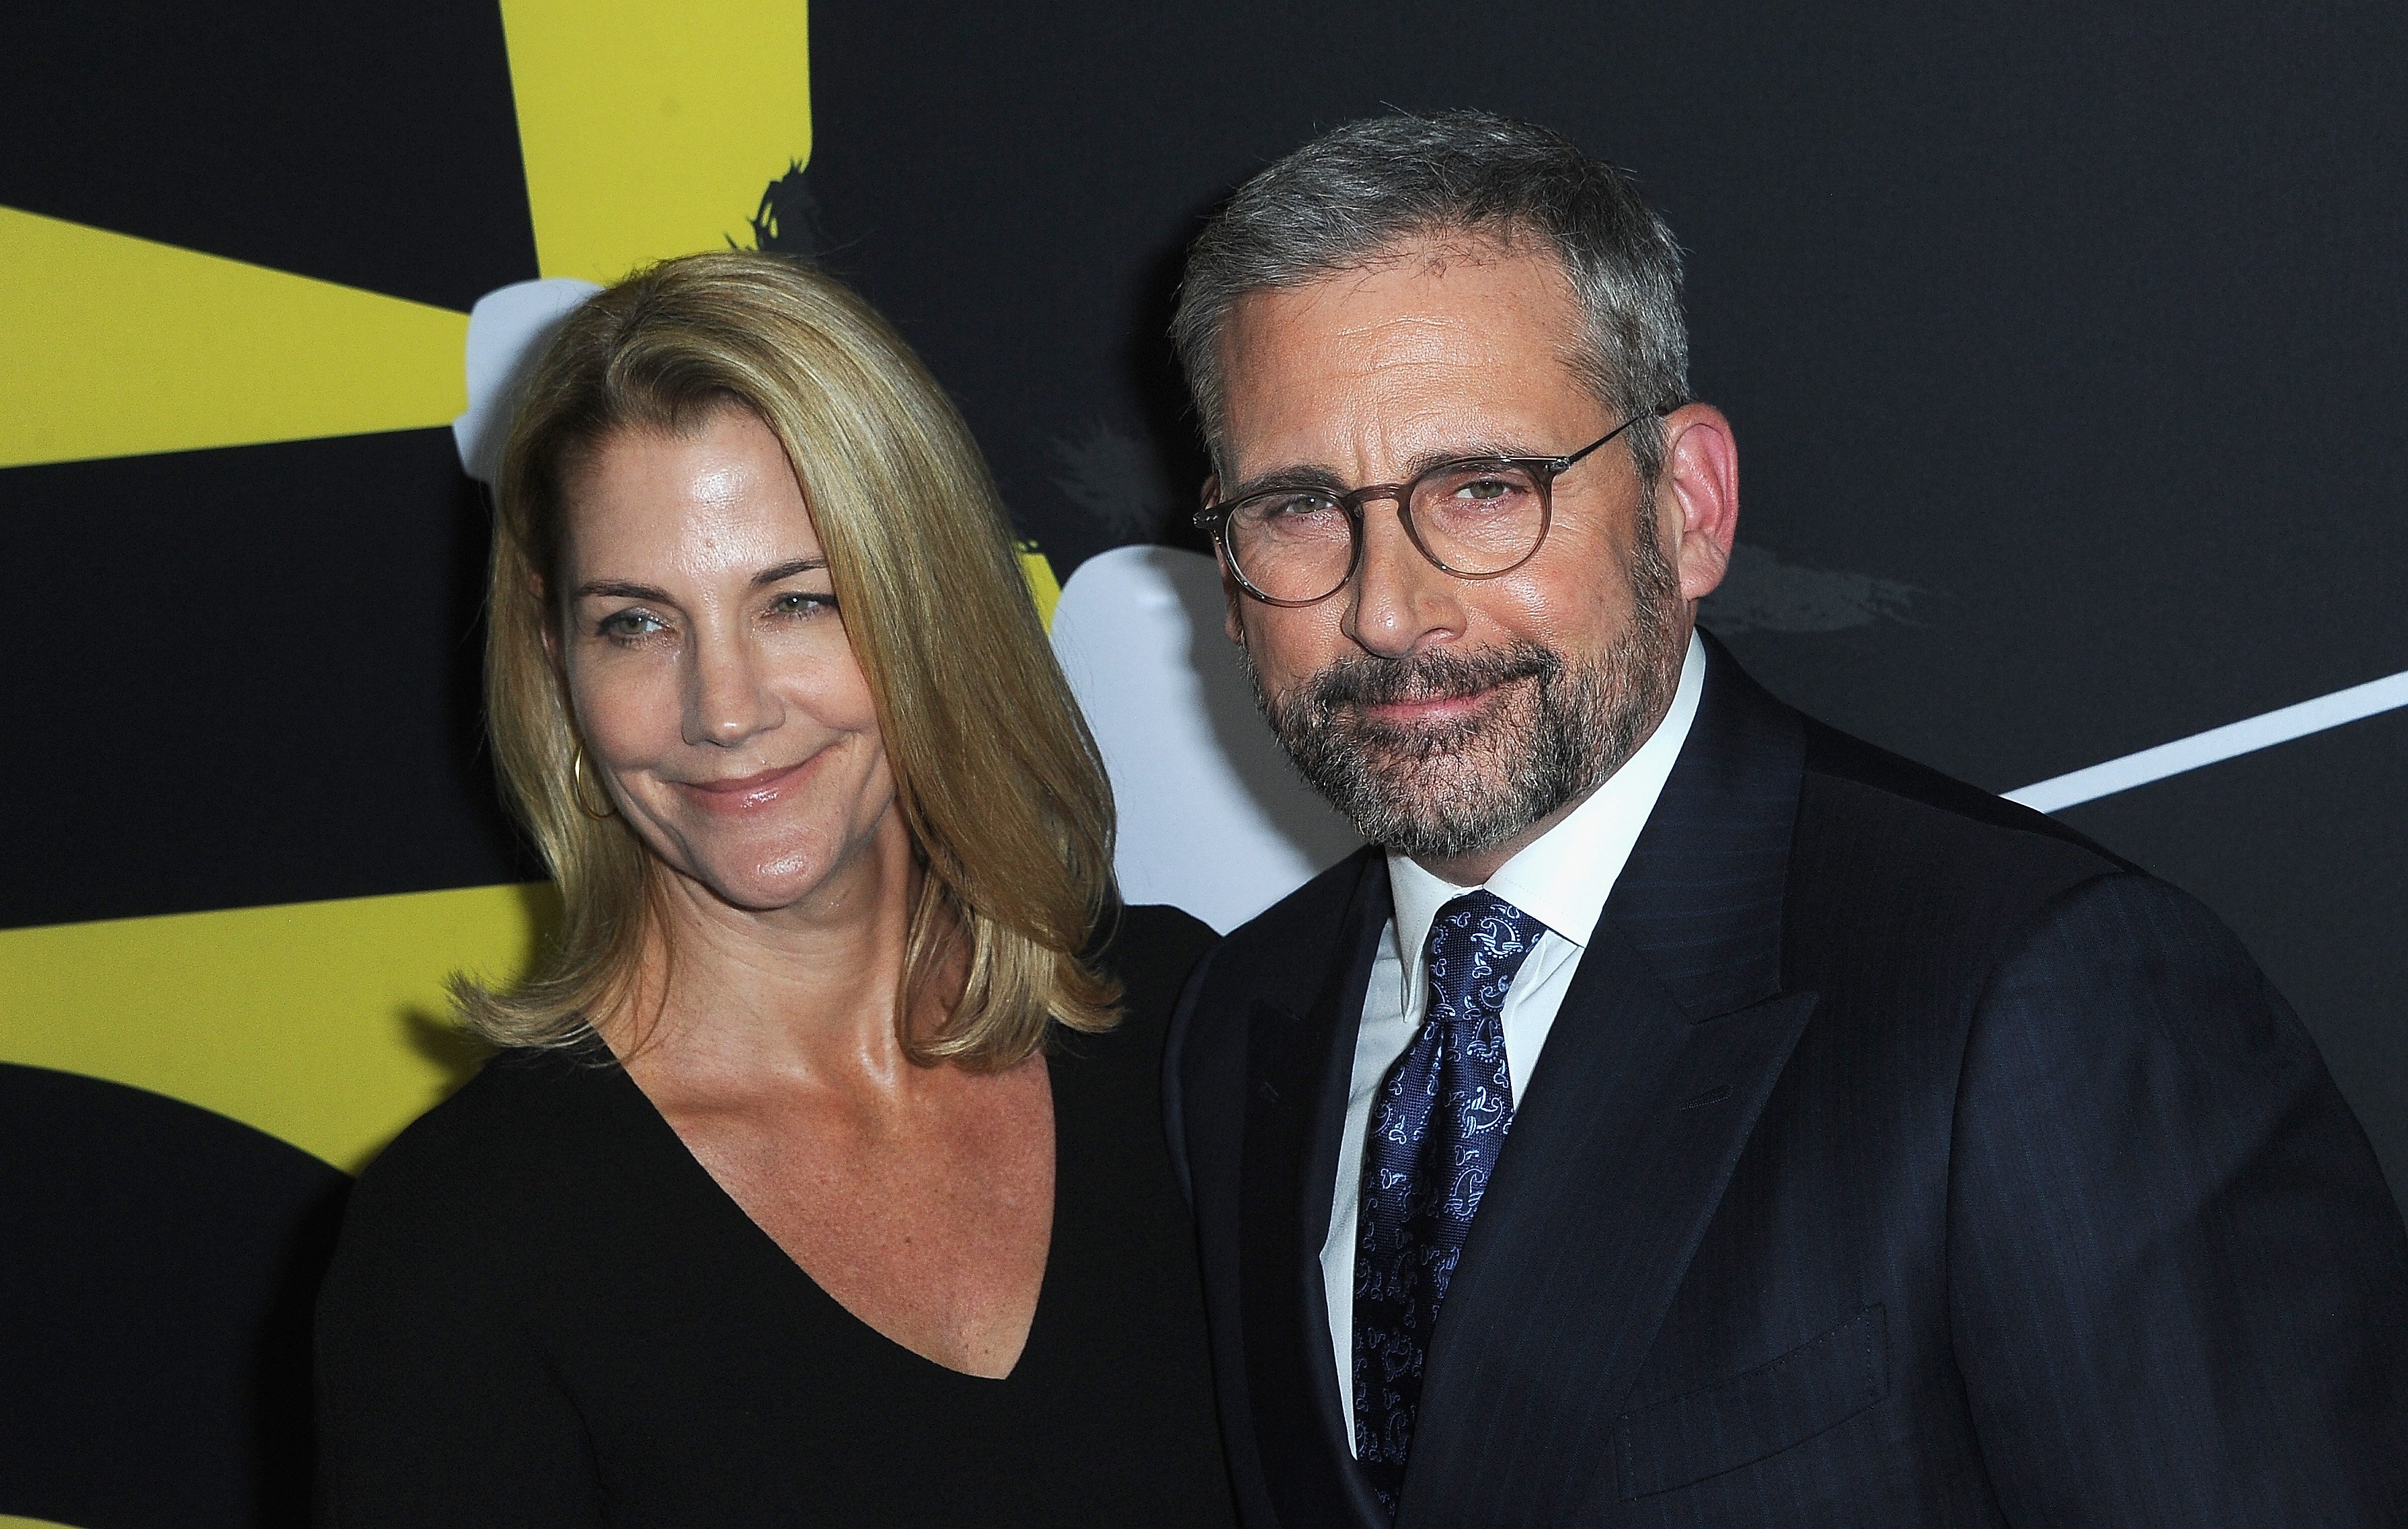  Steve Carell and wife Nancy Carell at the World Premiere Of "Vice" held at AMPAS Samuel Goldwyn Theater on December 11, 2018 in Beverly Hills, California | Photo: GettyImages